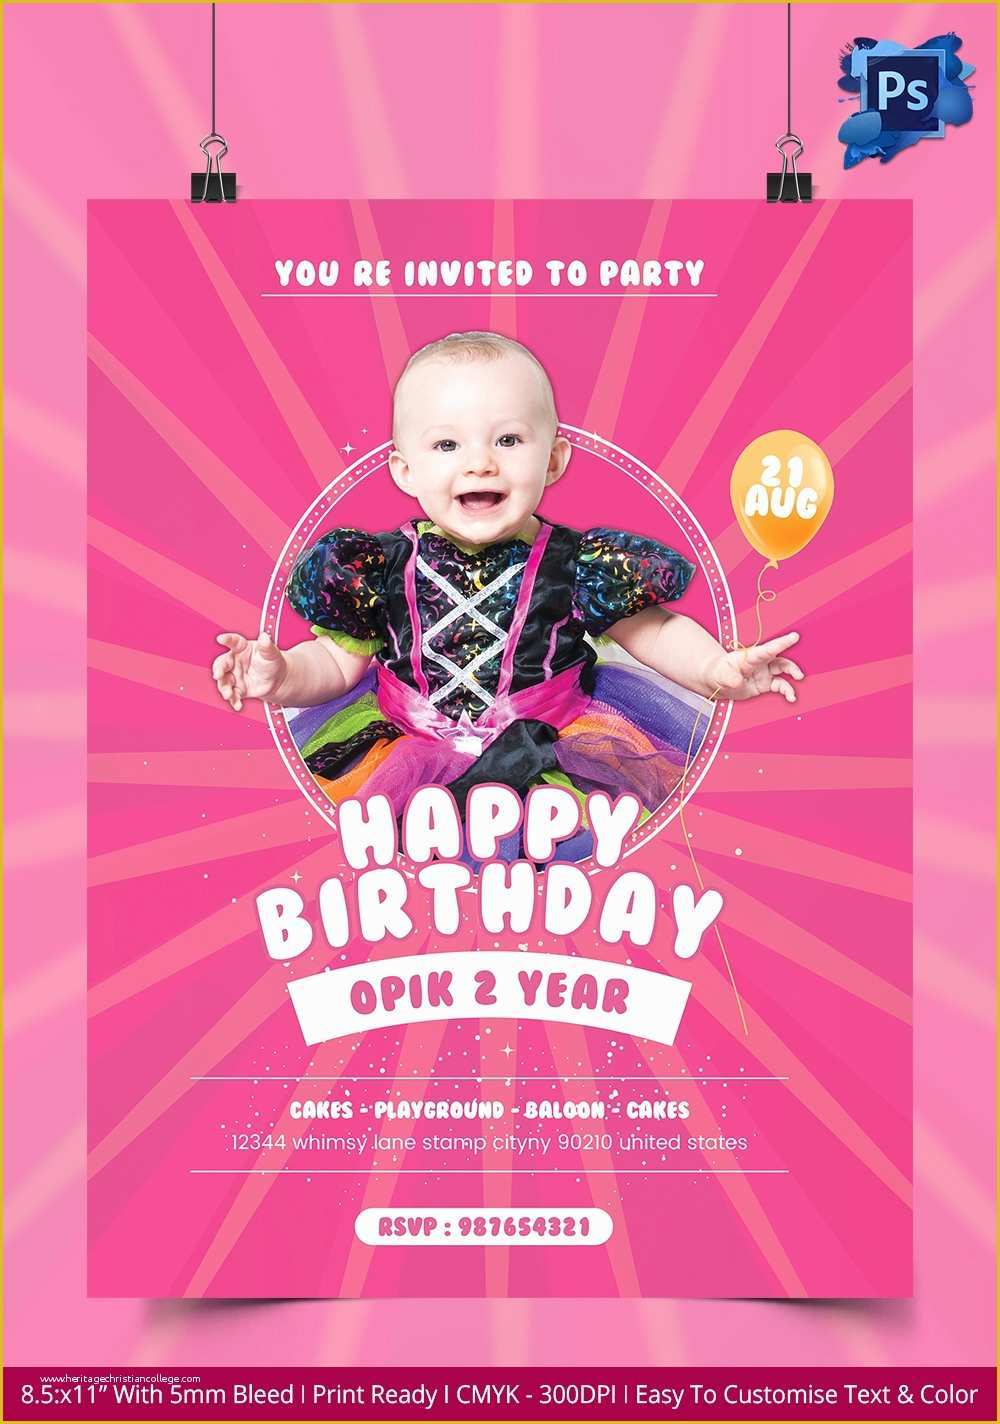 Free Birthday Flyer Templates Of 135 Psd Flyer Templates – Free Psd Eps Ai Indesign